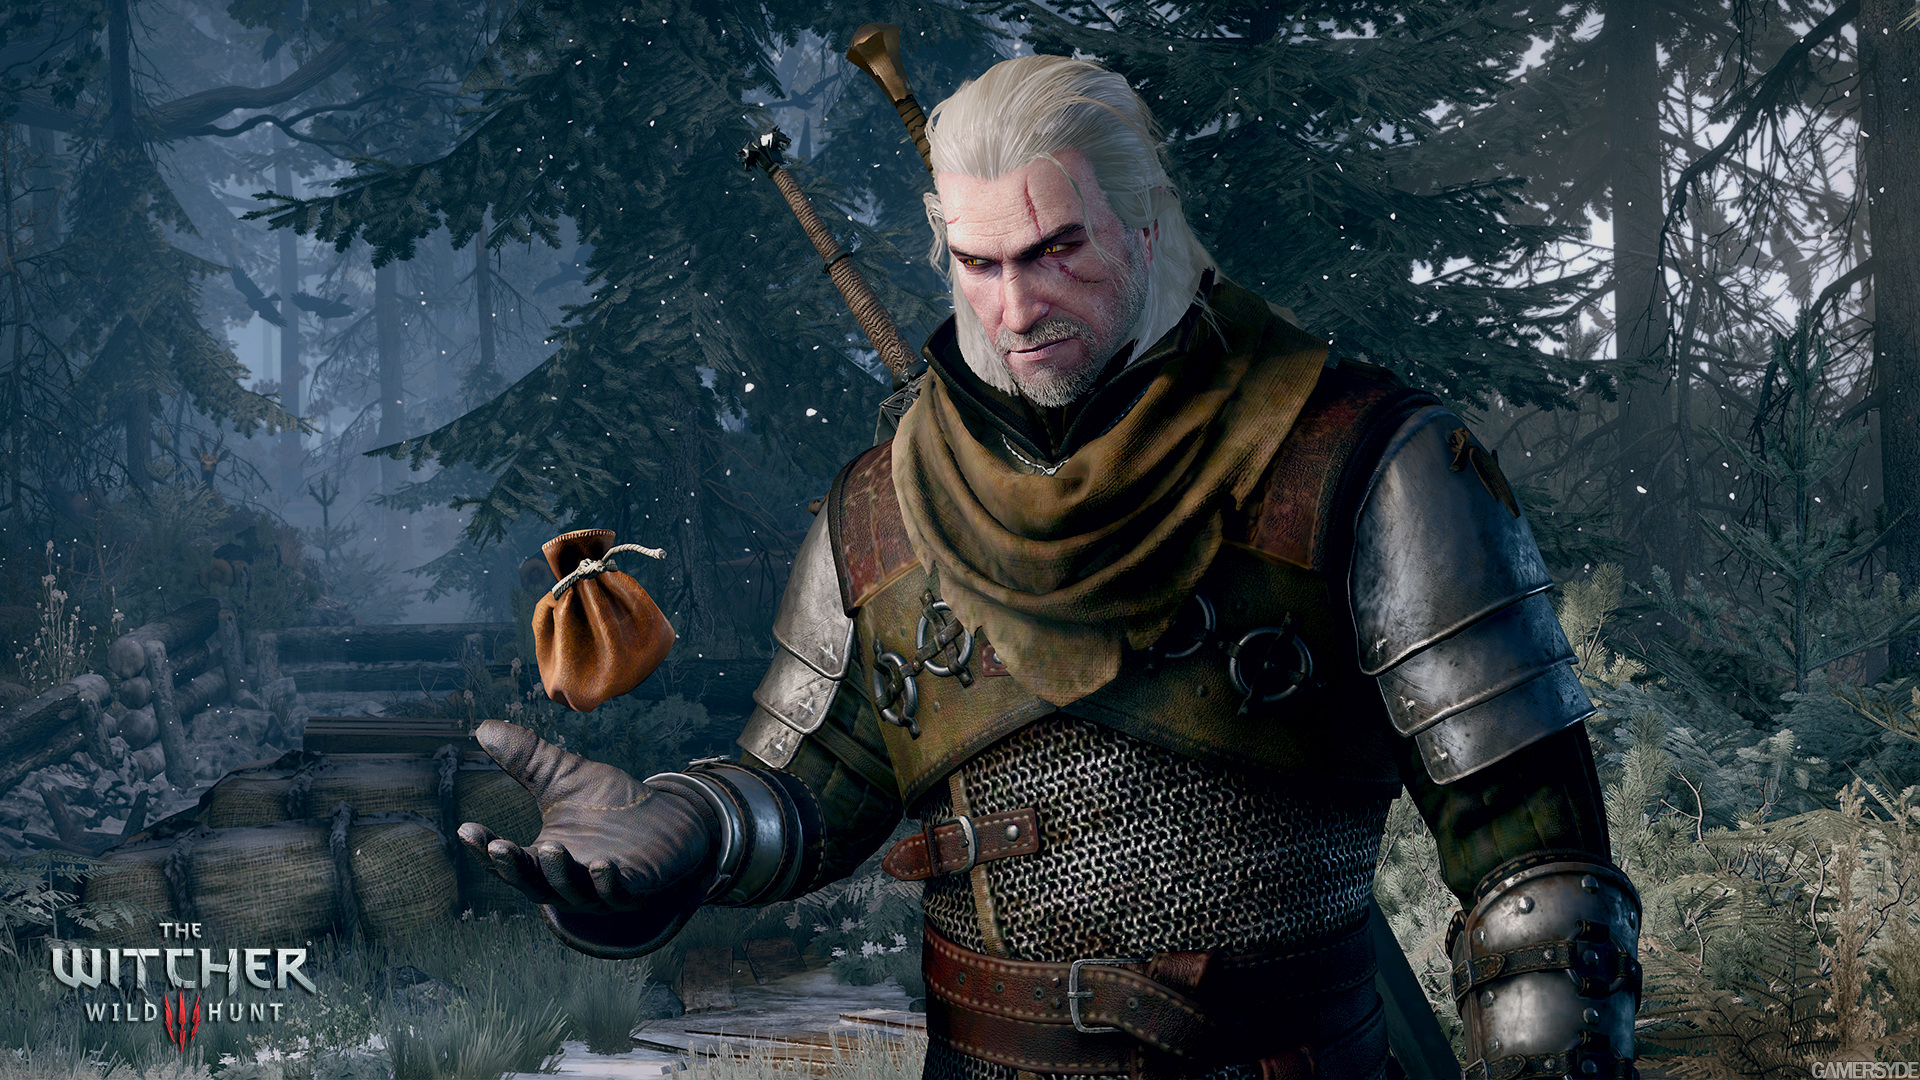 image_the_witcher_3_wild_hunt-27433-2651_0003